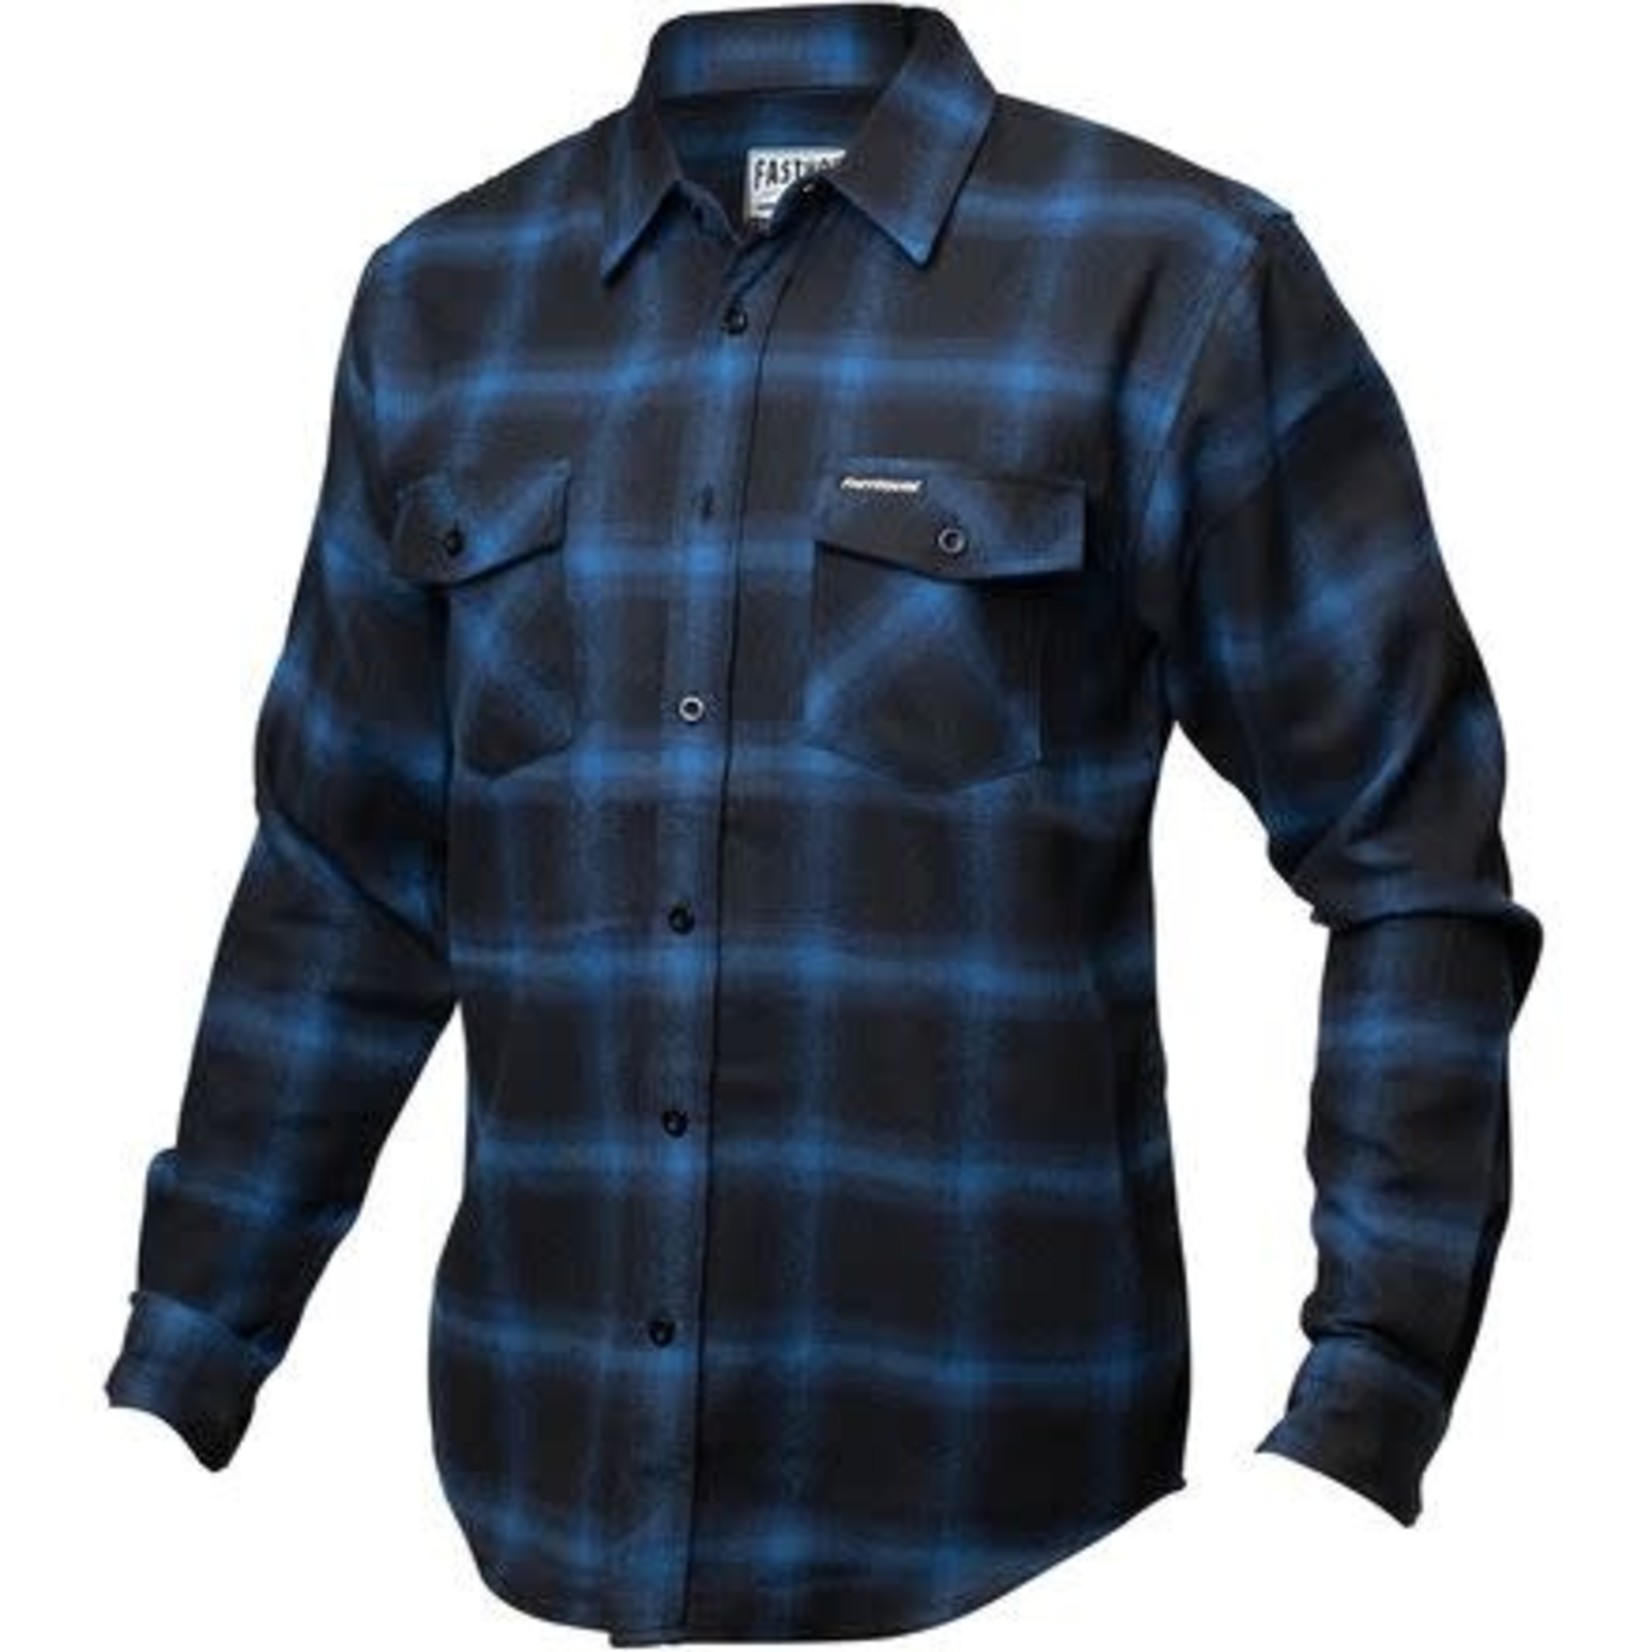 FASTHOUSE FASHOUSE FLANNEL SHIRT